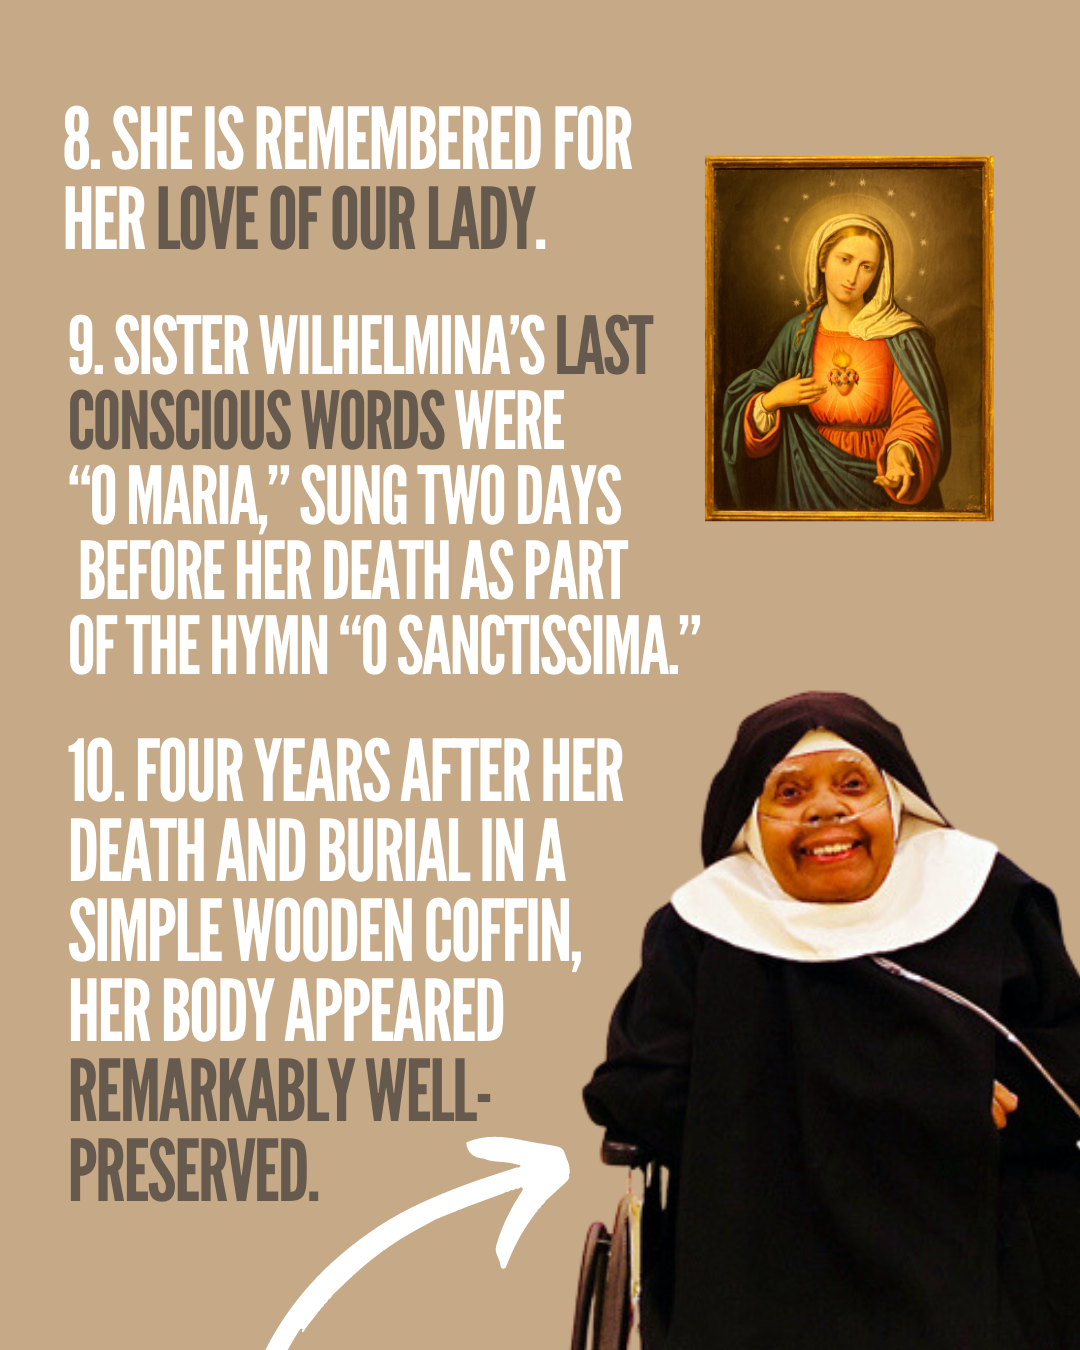 Facts about Sister Wilhelmina